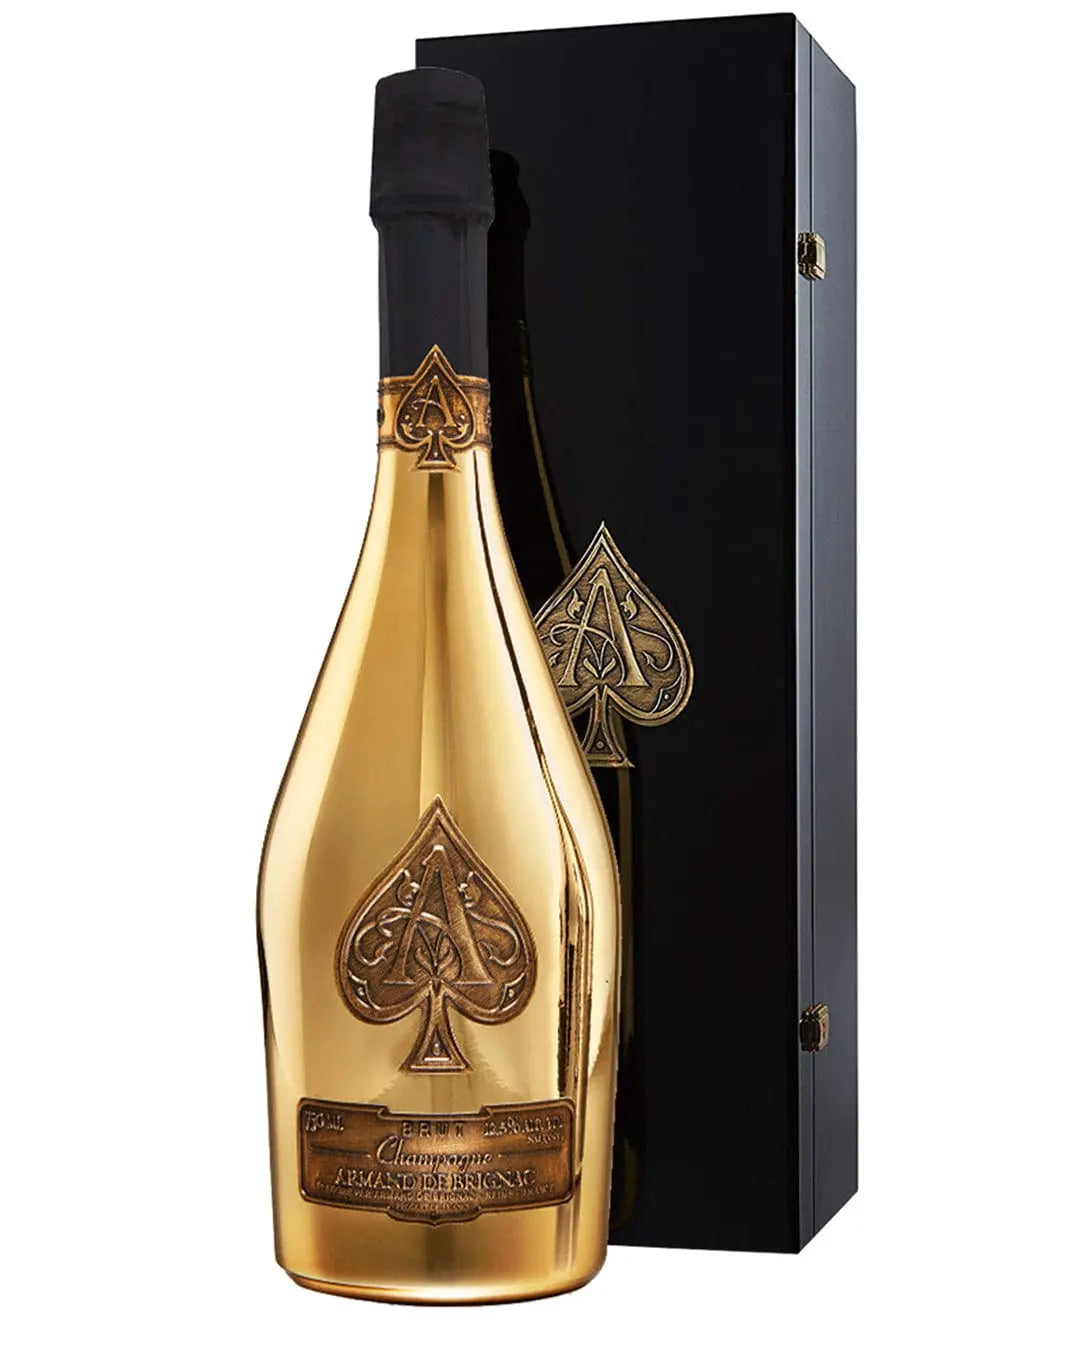 Ace Of Spades Champagne Sticker by Armand de Brignac for iOS & Android